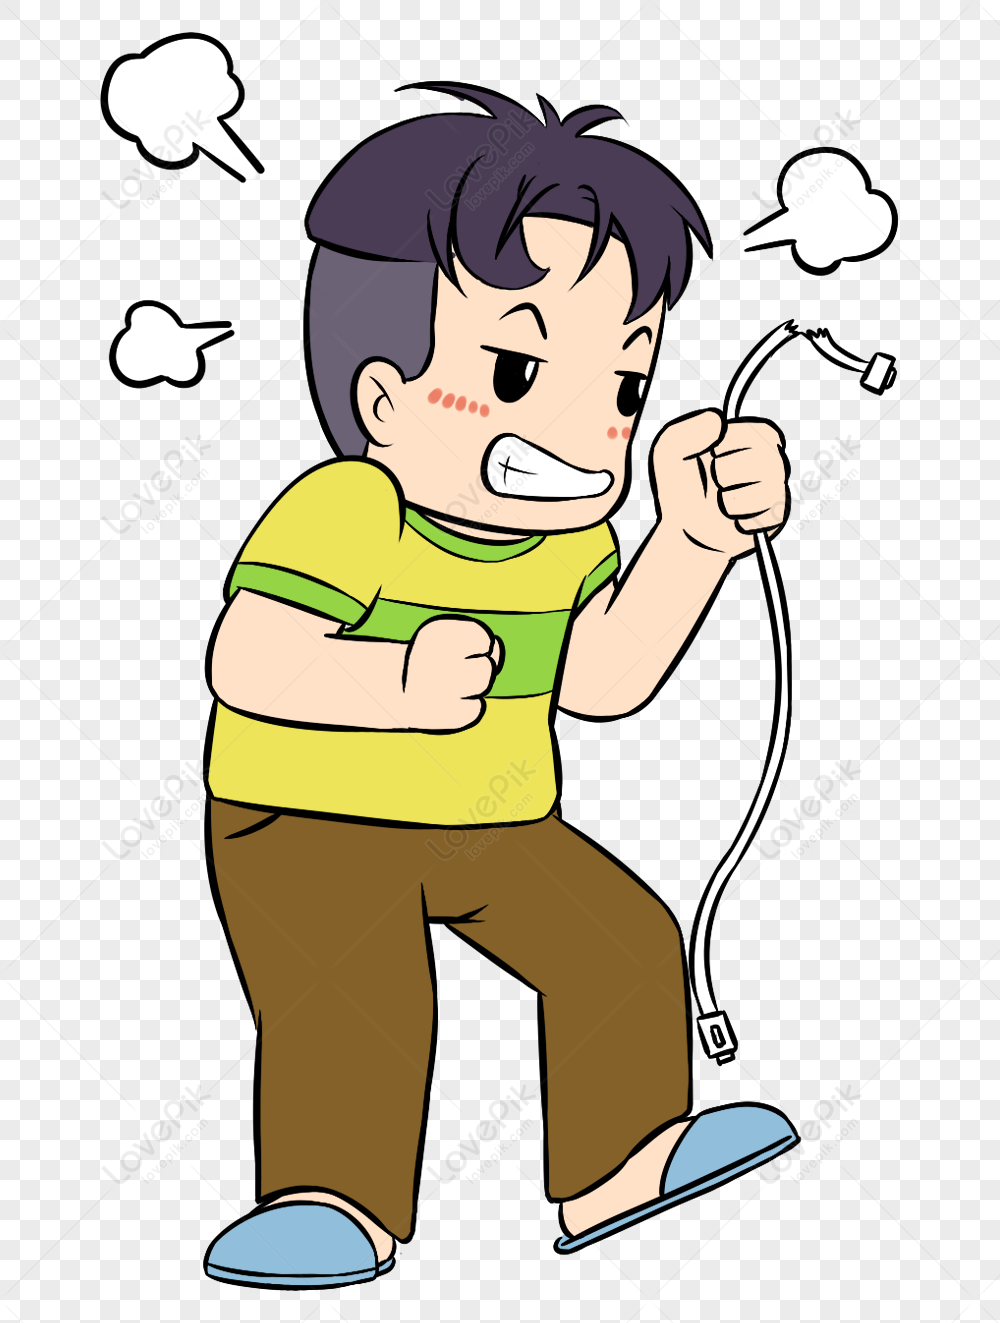 Angry Boy Free PNG And Clipart Image For Free Download - Lovepik | 400343359